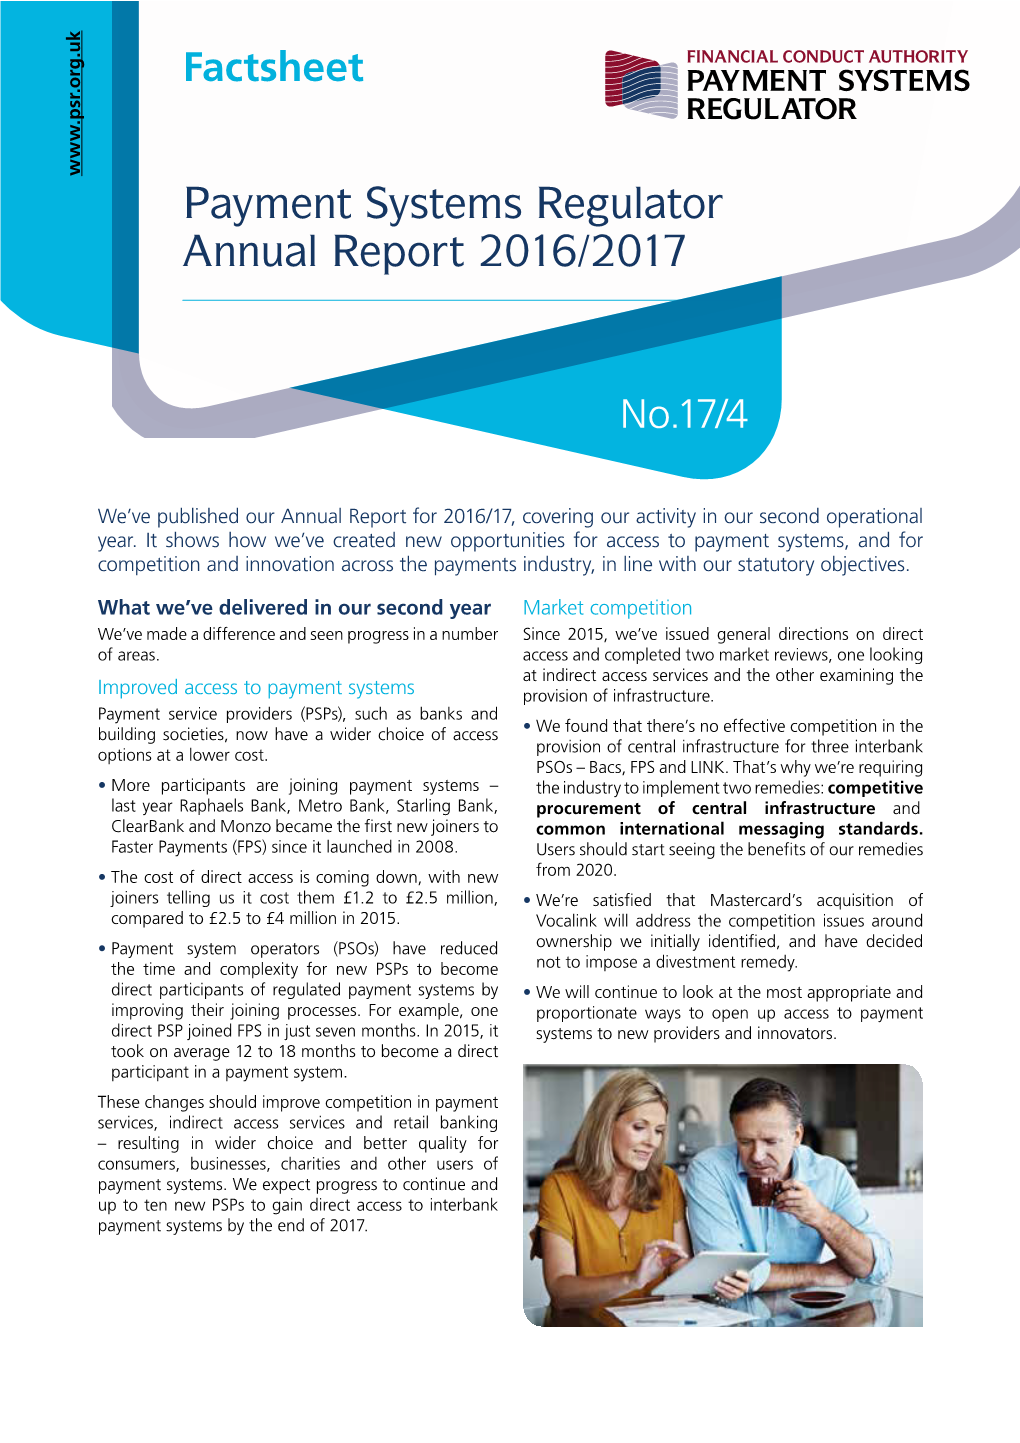 Payment Systems Regulator Annual Report 2016/2017